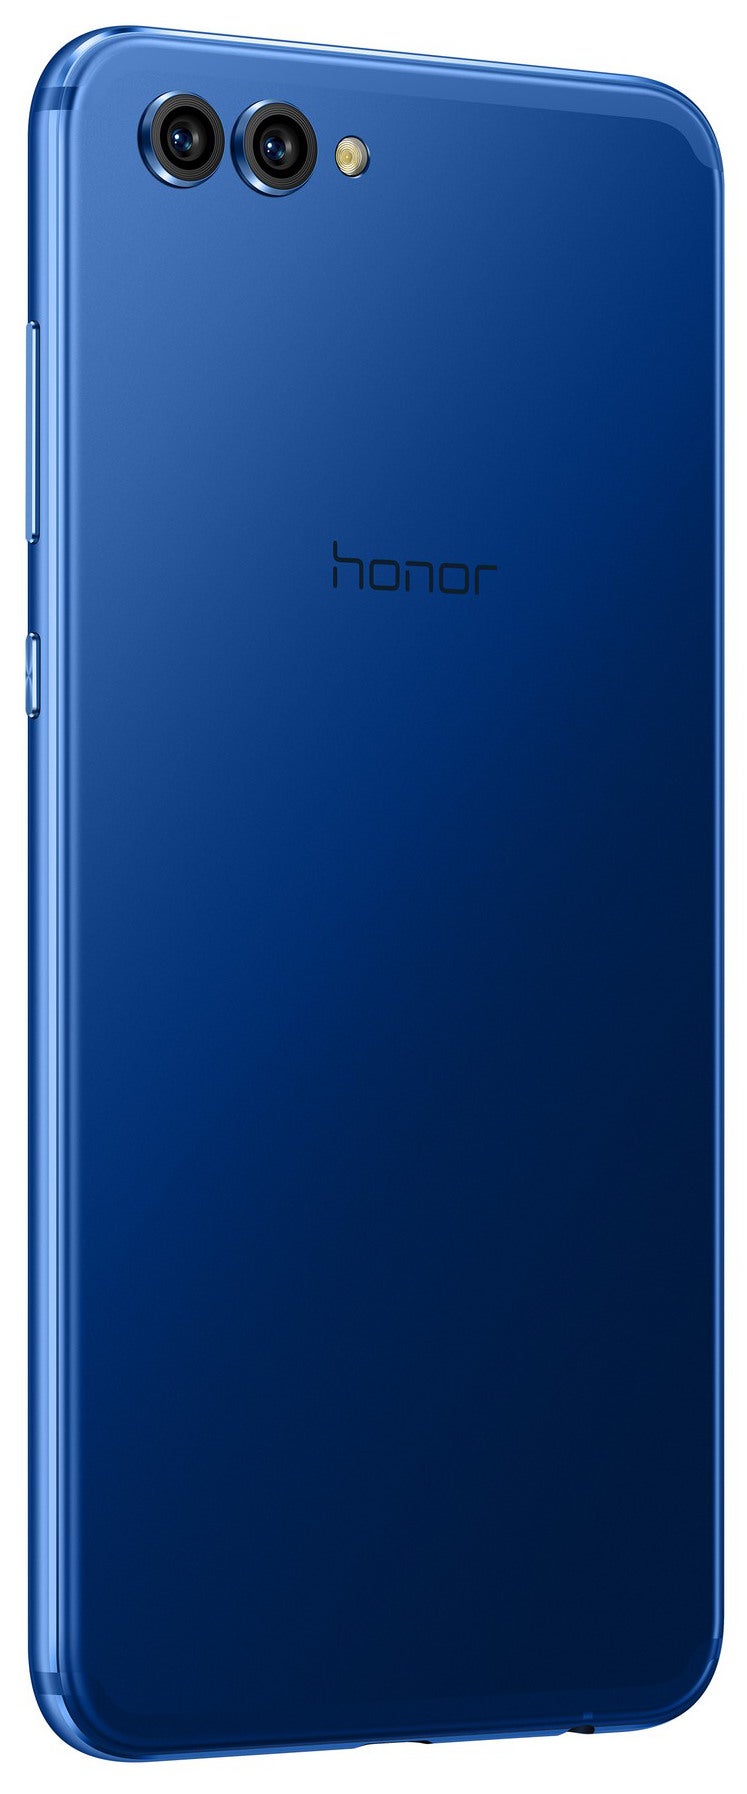 Honor View 10 unveiled to take on the OnePlus 5T with dual camera and big battery